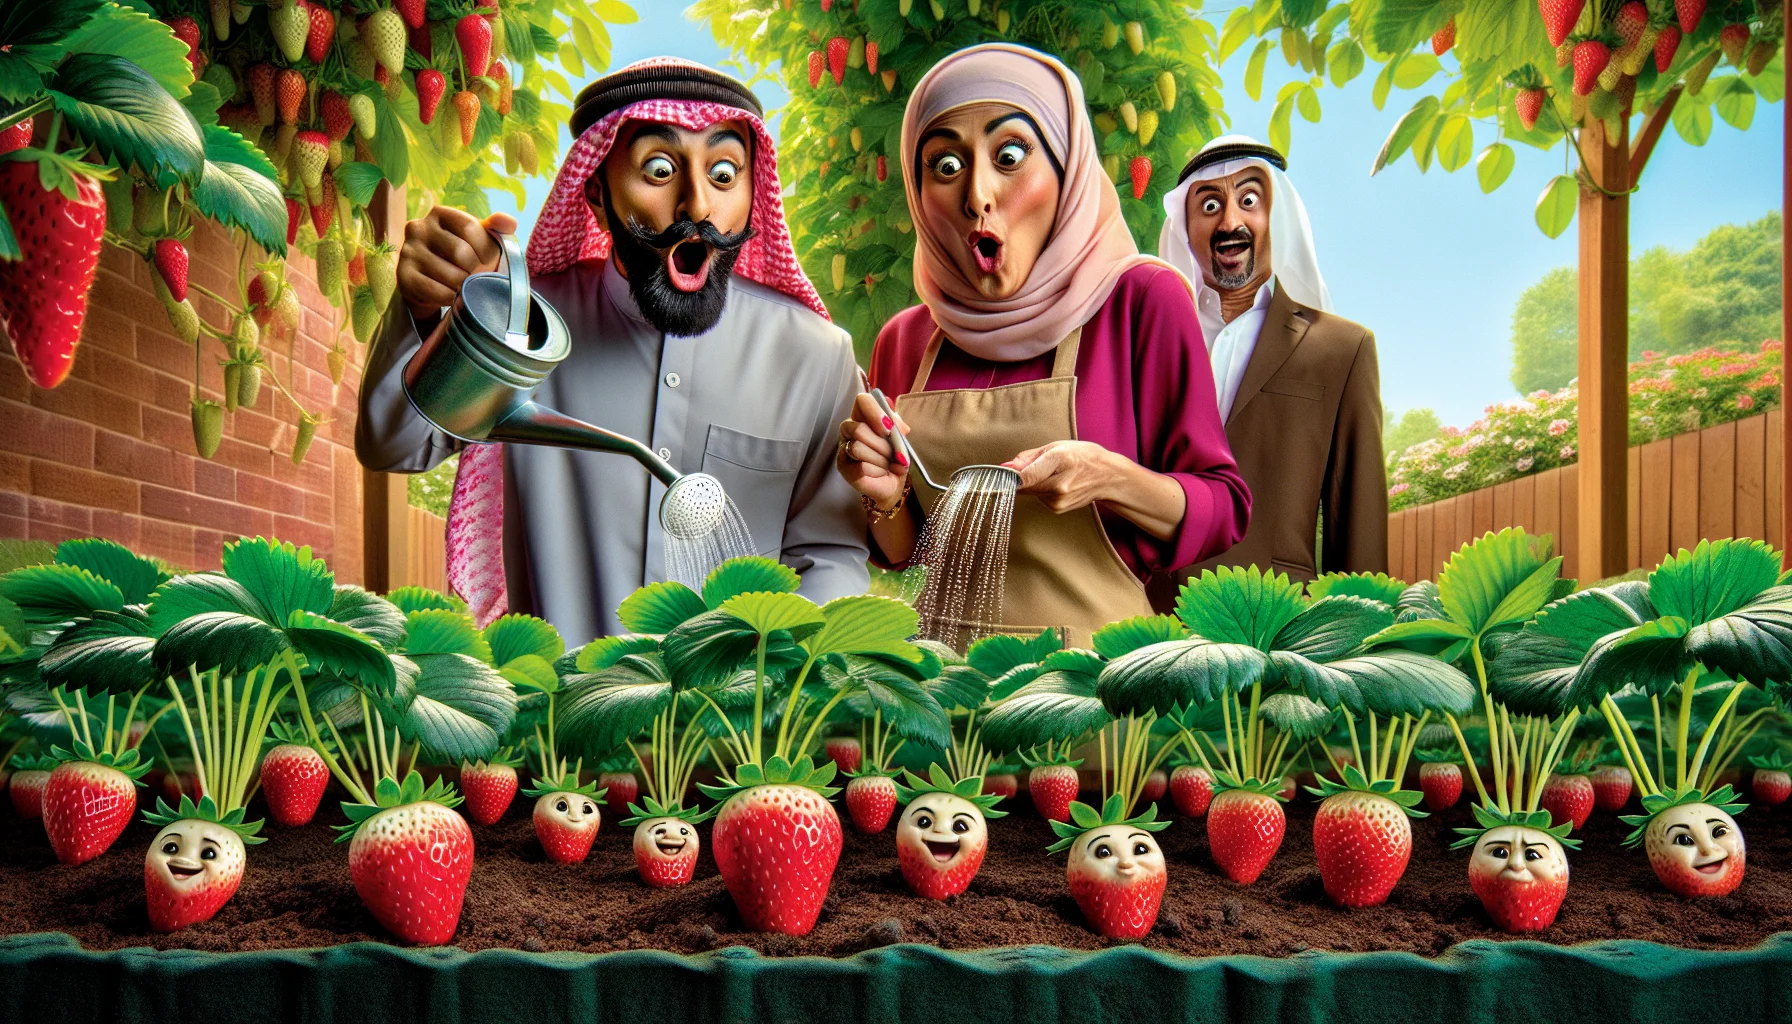 A humorous scenario set in a lush garden with mature strawberry plants laden with ripe, juicy, red strawberries. This scene depicts the journey of strawberries growing from tiny seeds with comic touches. The seeds, characterized with tiny faces showing courage, are embarking on their growth journey. South Asian woman in gardener attire with a surprised look provides a lively atmosphere, while a Middle-Eastern man with a watering can in his hands demonstrates the nurturing stage with exaggerated, funny movements. This fun-filled gardening scene brings laughter while encouraging the joy of gardening at the same time.